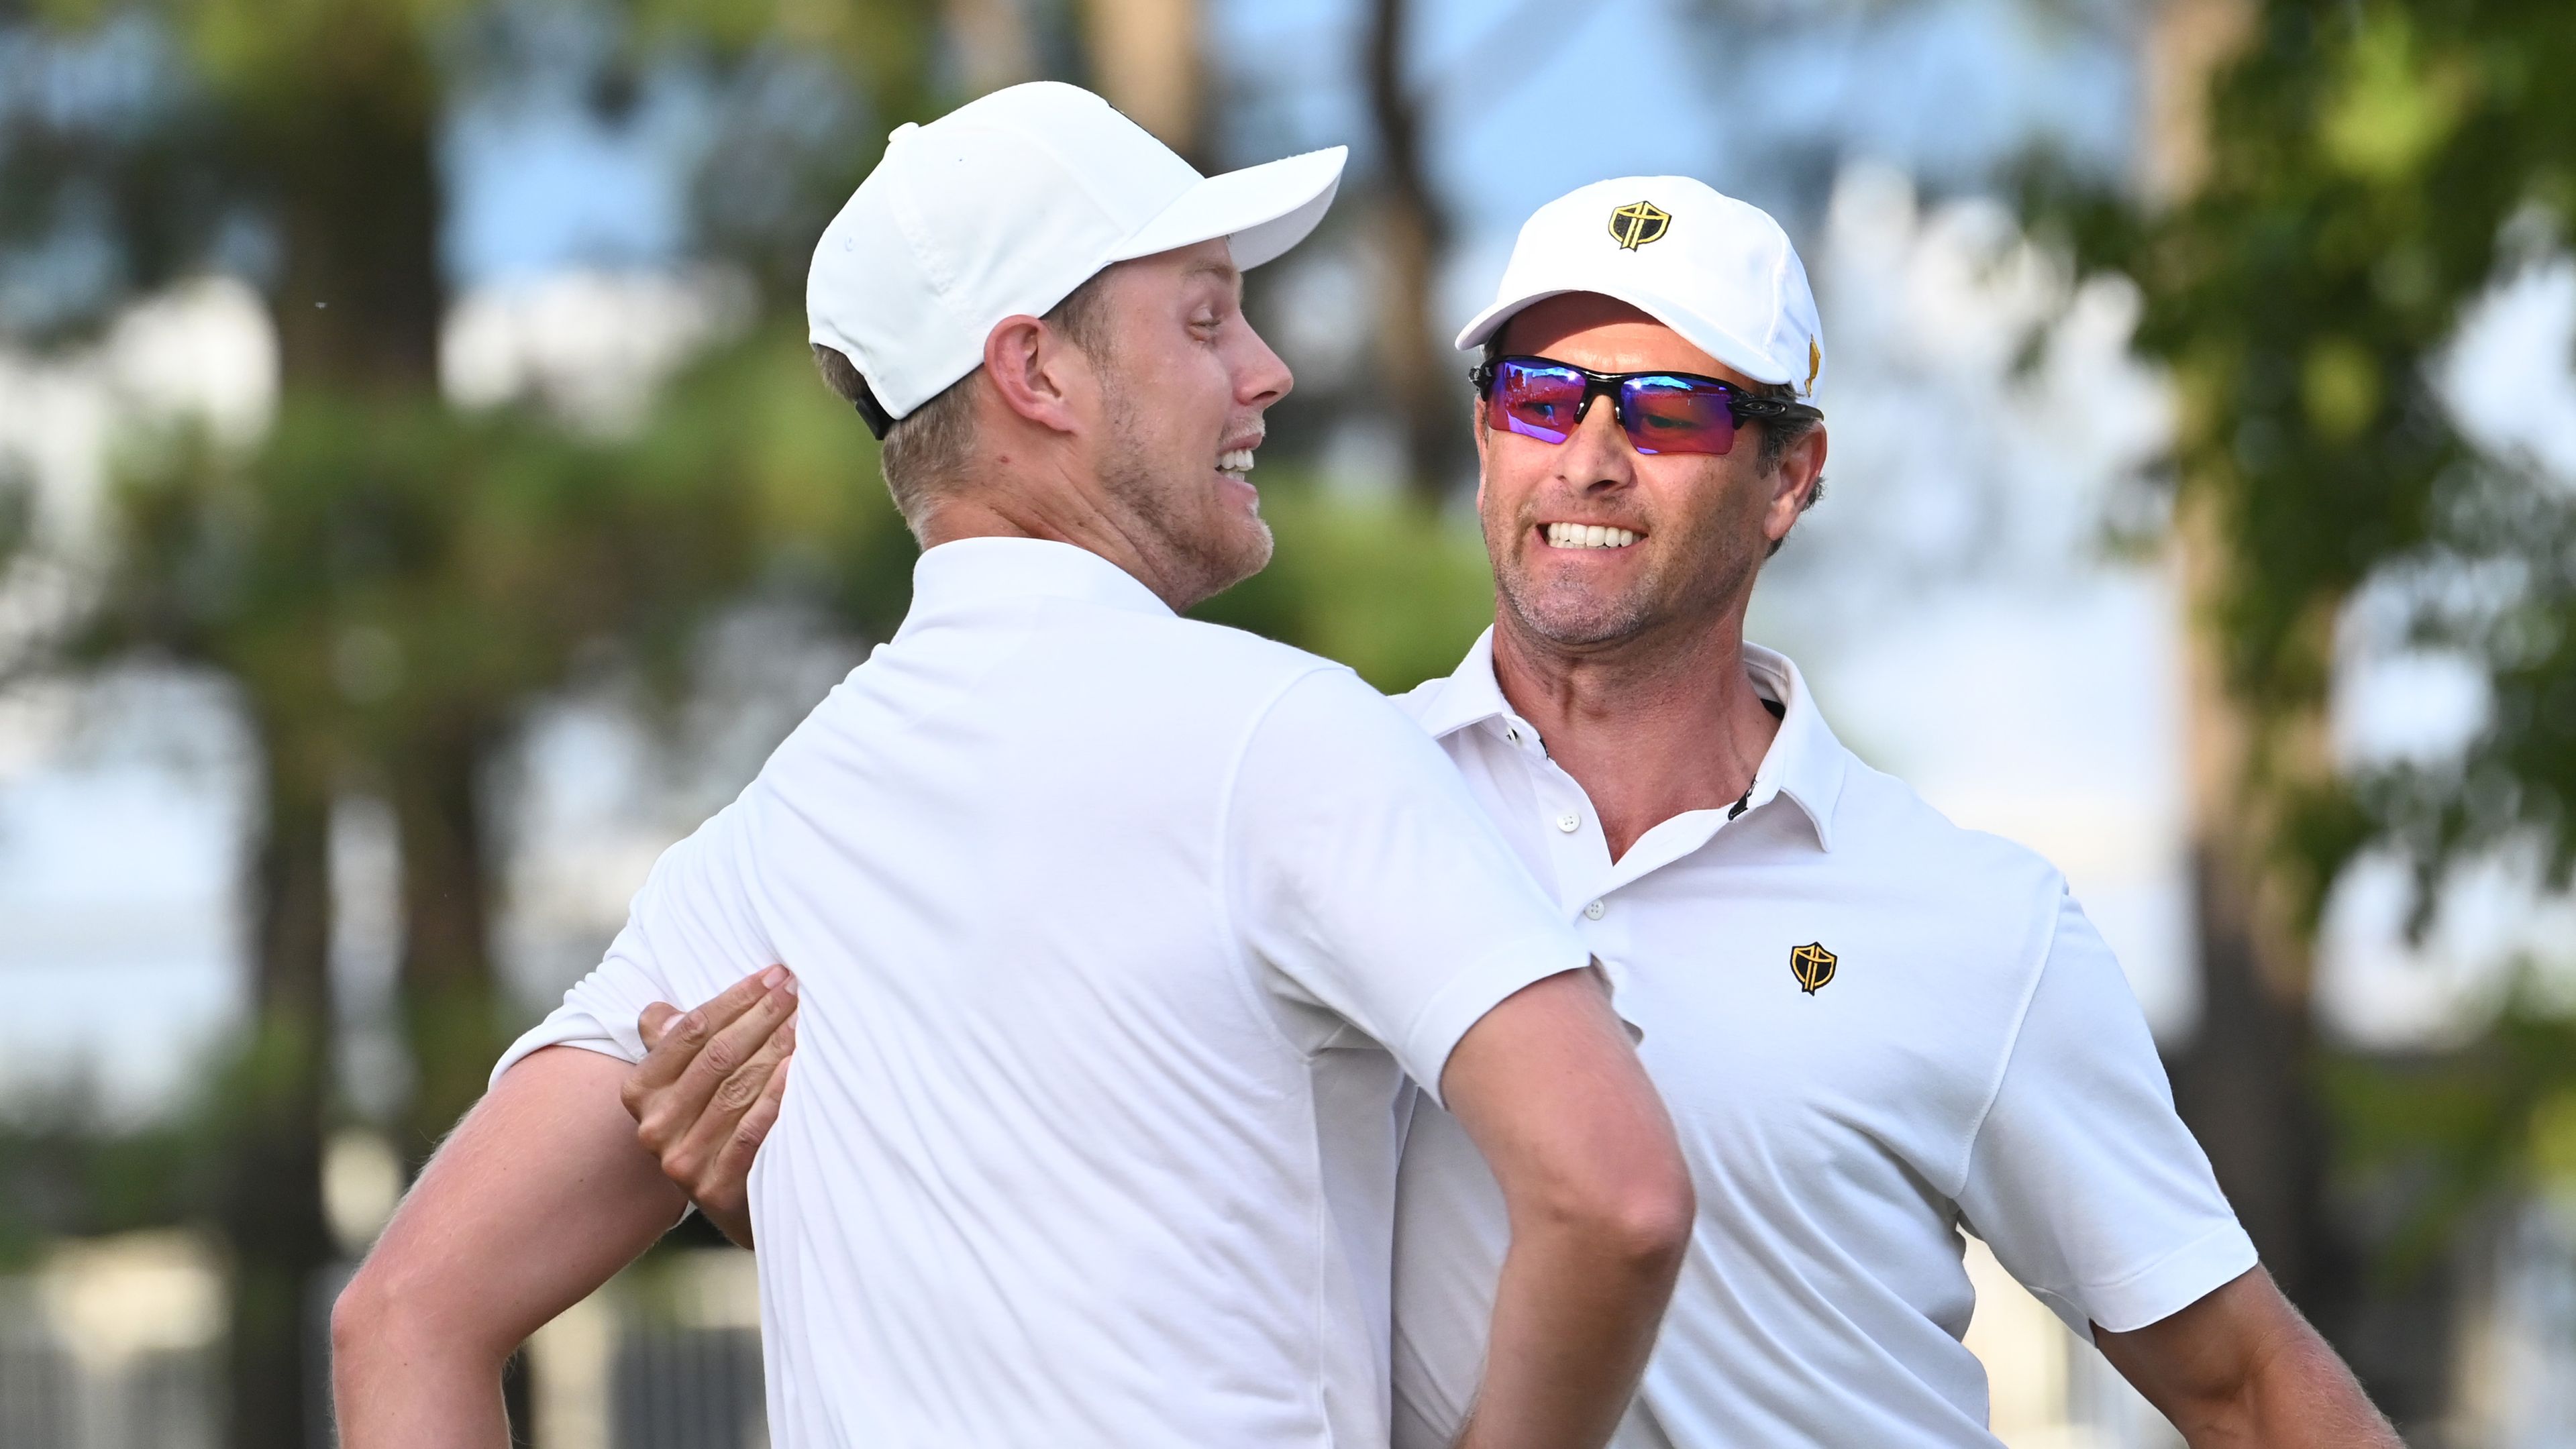 International Team Member Adam Scott of Australia celebrates with Cam Davis of Australia after making a putt during the Saturday afternoon Four-Ball Match Play of Presidents Cup at Quail Hollow September 24, 2022, in Charlotte, North Carolina. (Photo by Keyur Khamar/PGA TOUR via Getty Images)